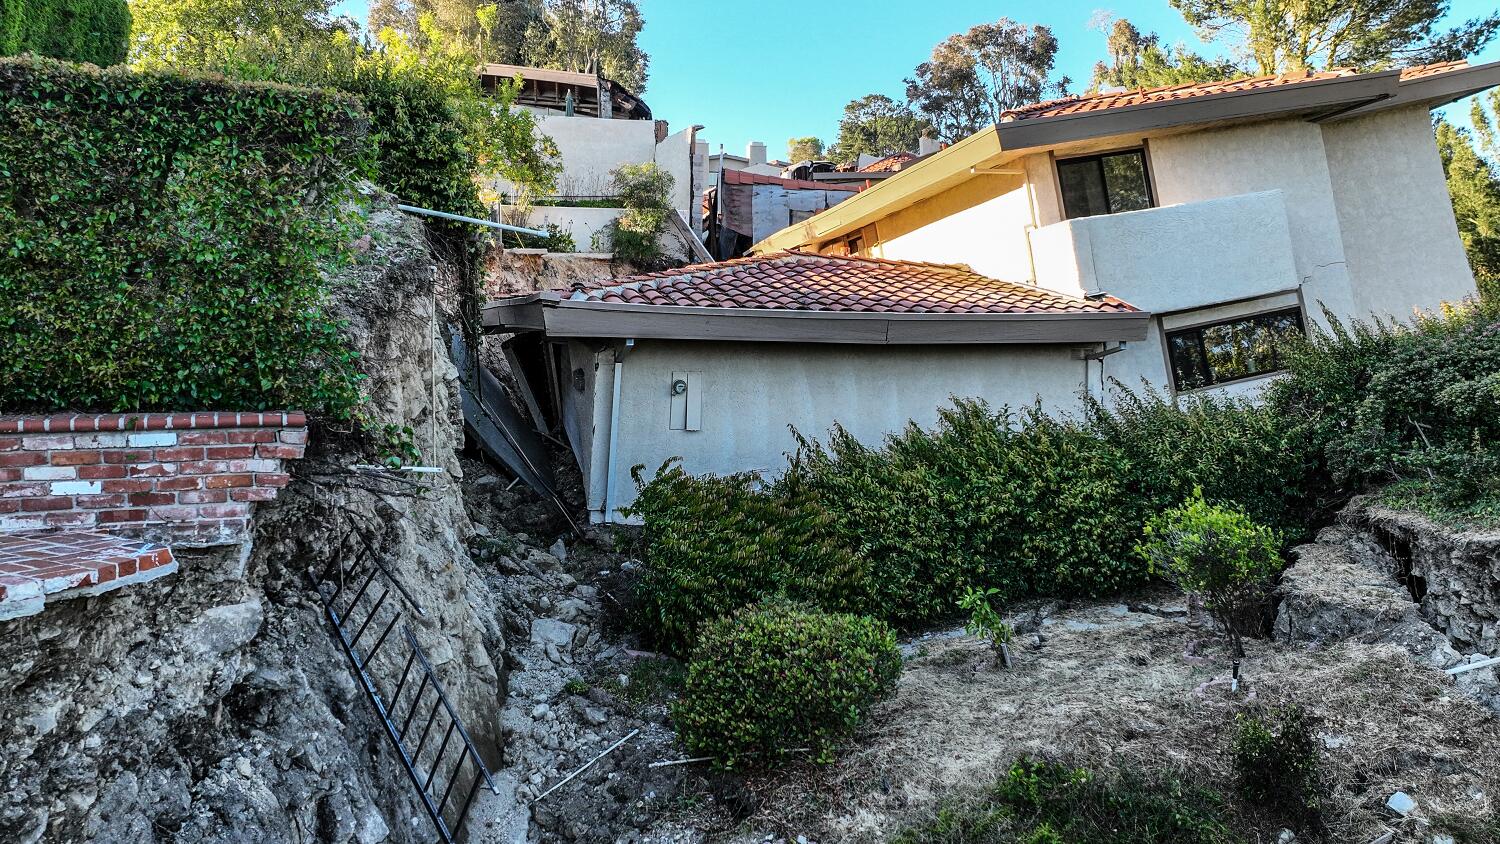 Does your home insurance cover a landslide? Here's what you need to know